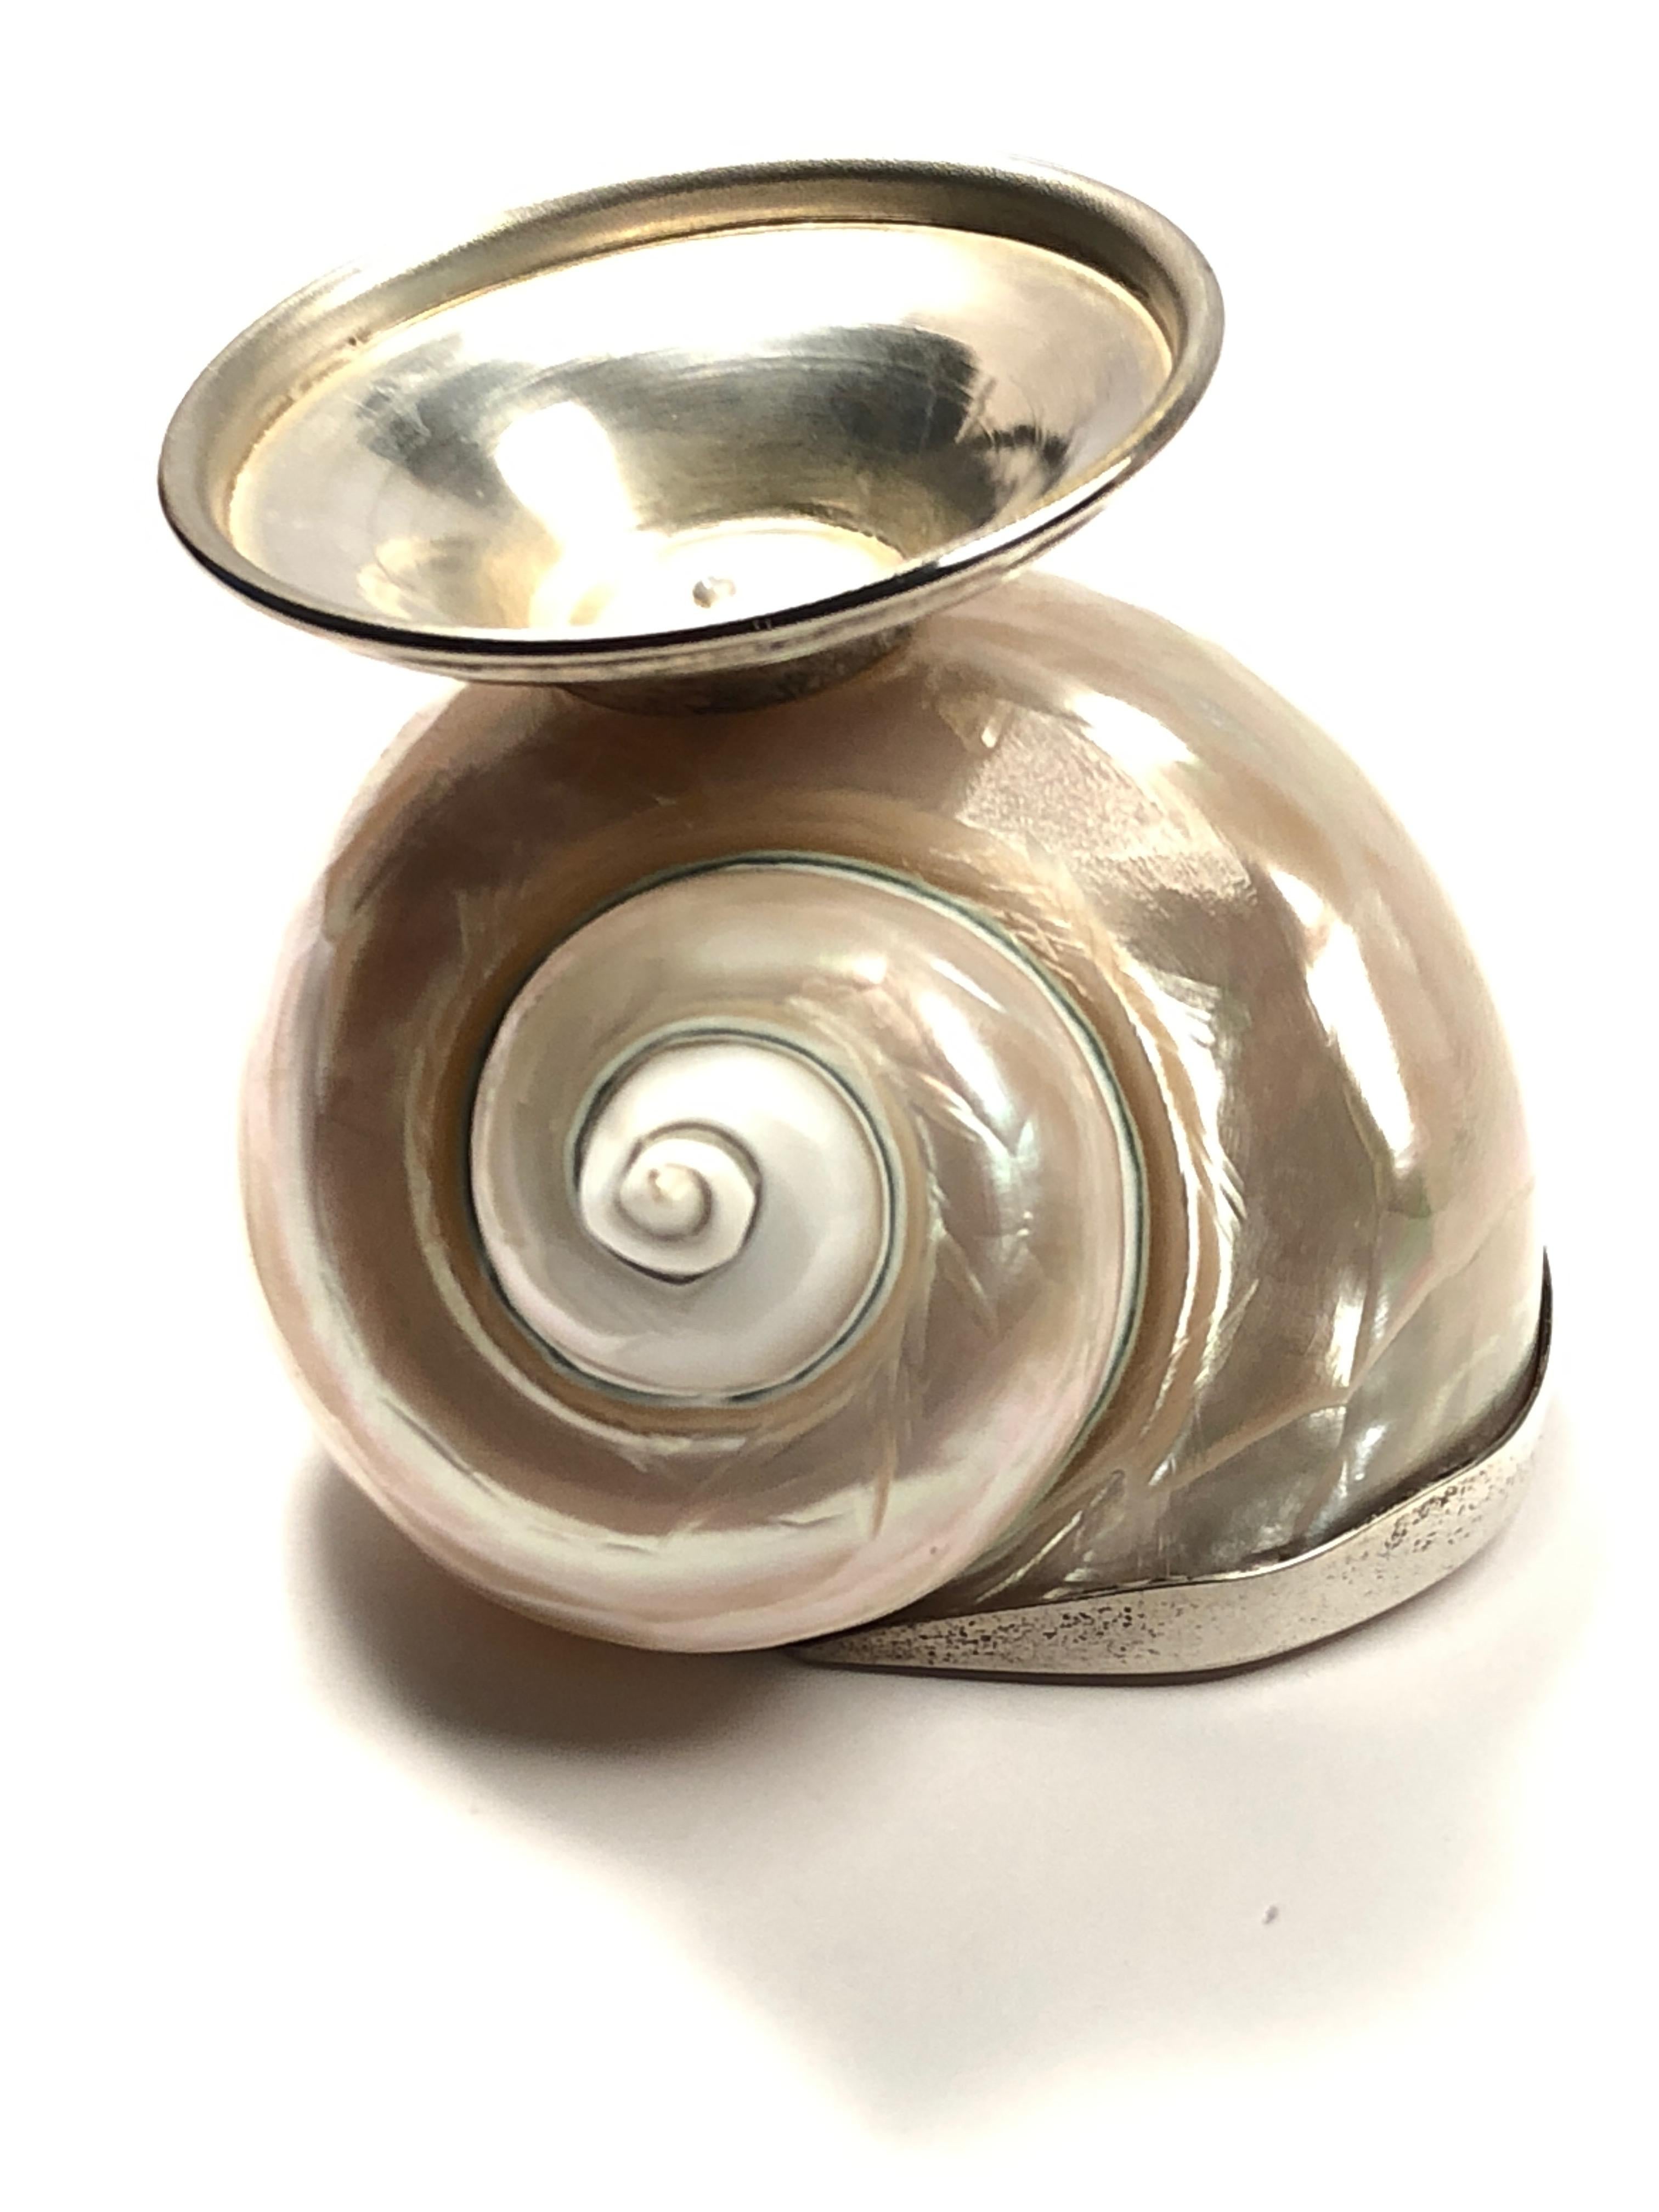 Mid-Century Modern Rare Binazzi Shell Trinket Bowl Sculpture, 1970s, Italy For Sale